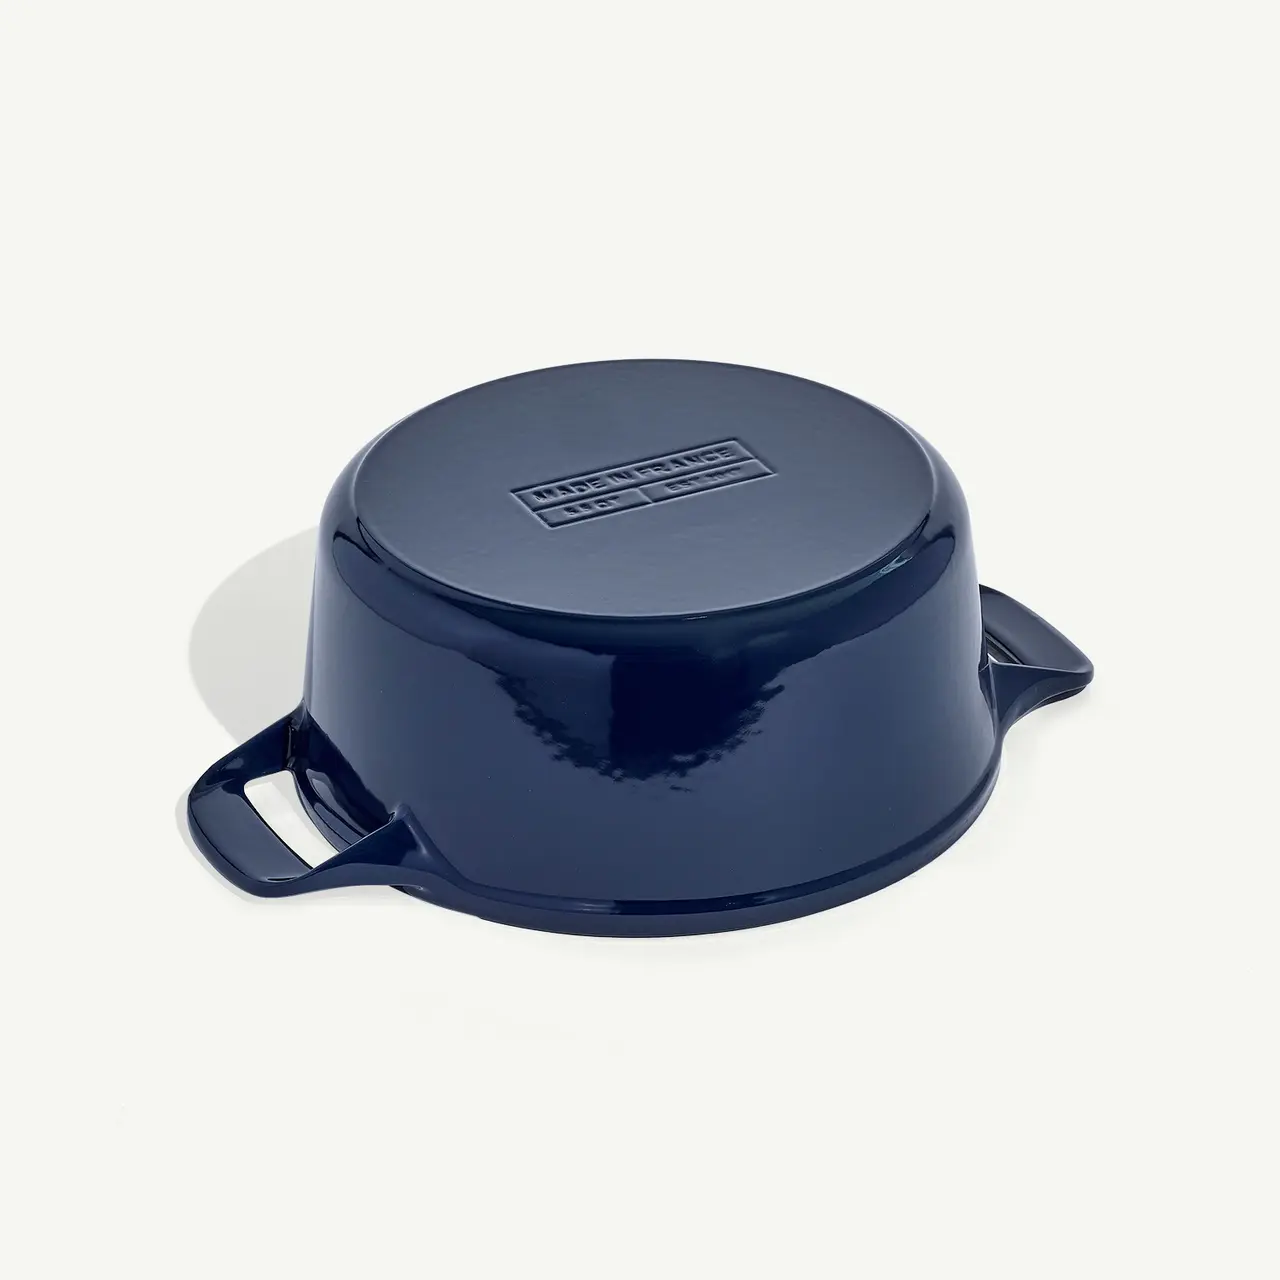 A dark blue, round casserole dish with lids and handles rests on a light background.